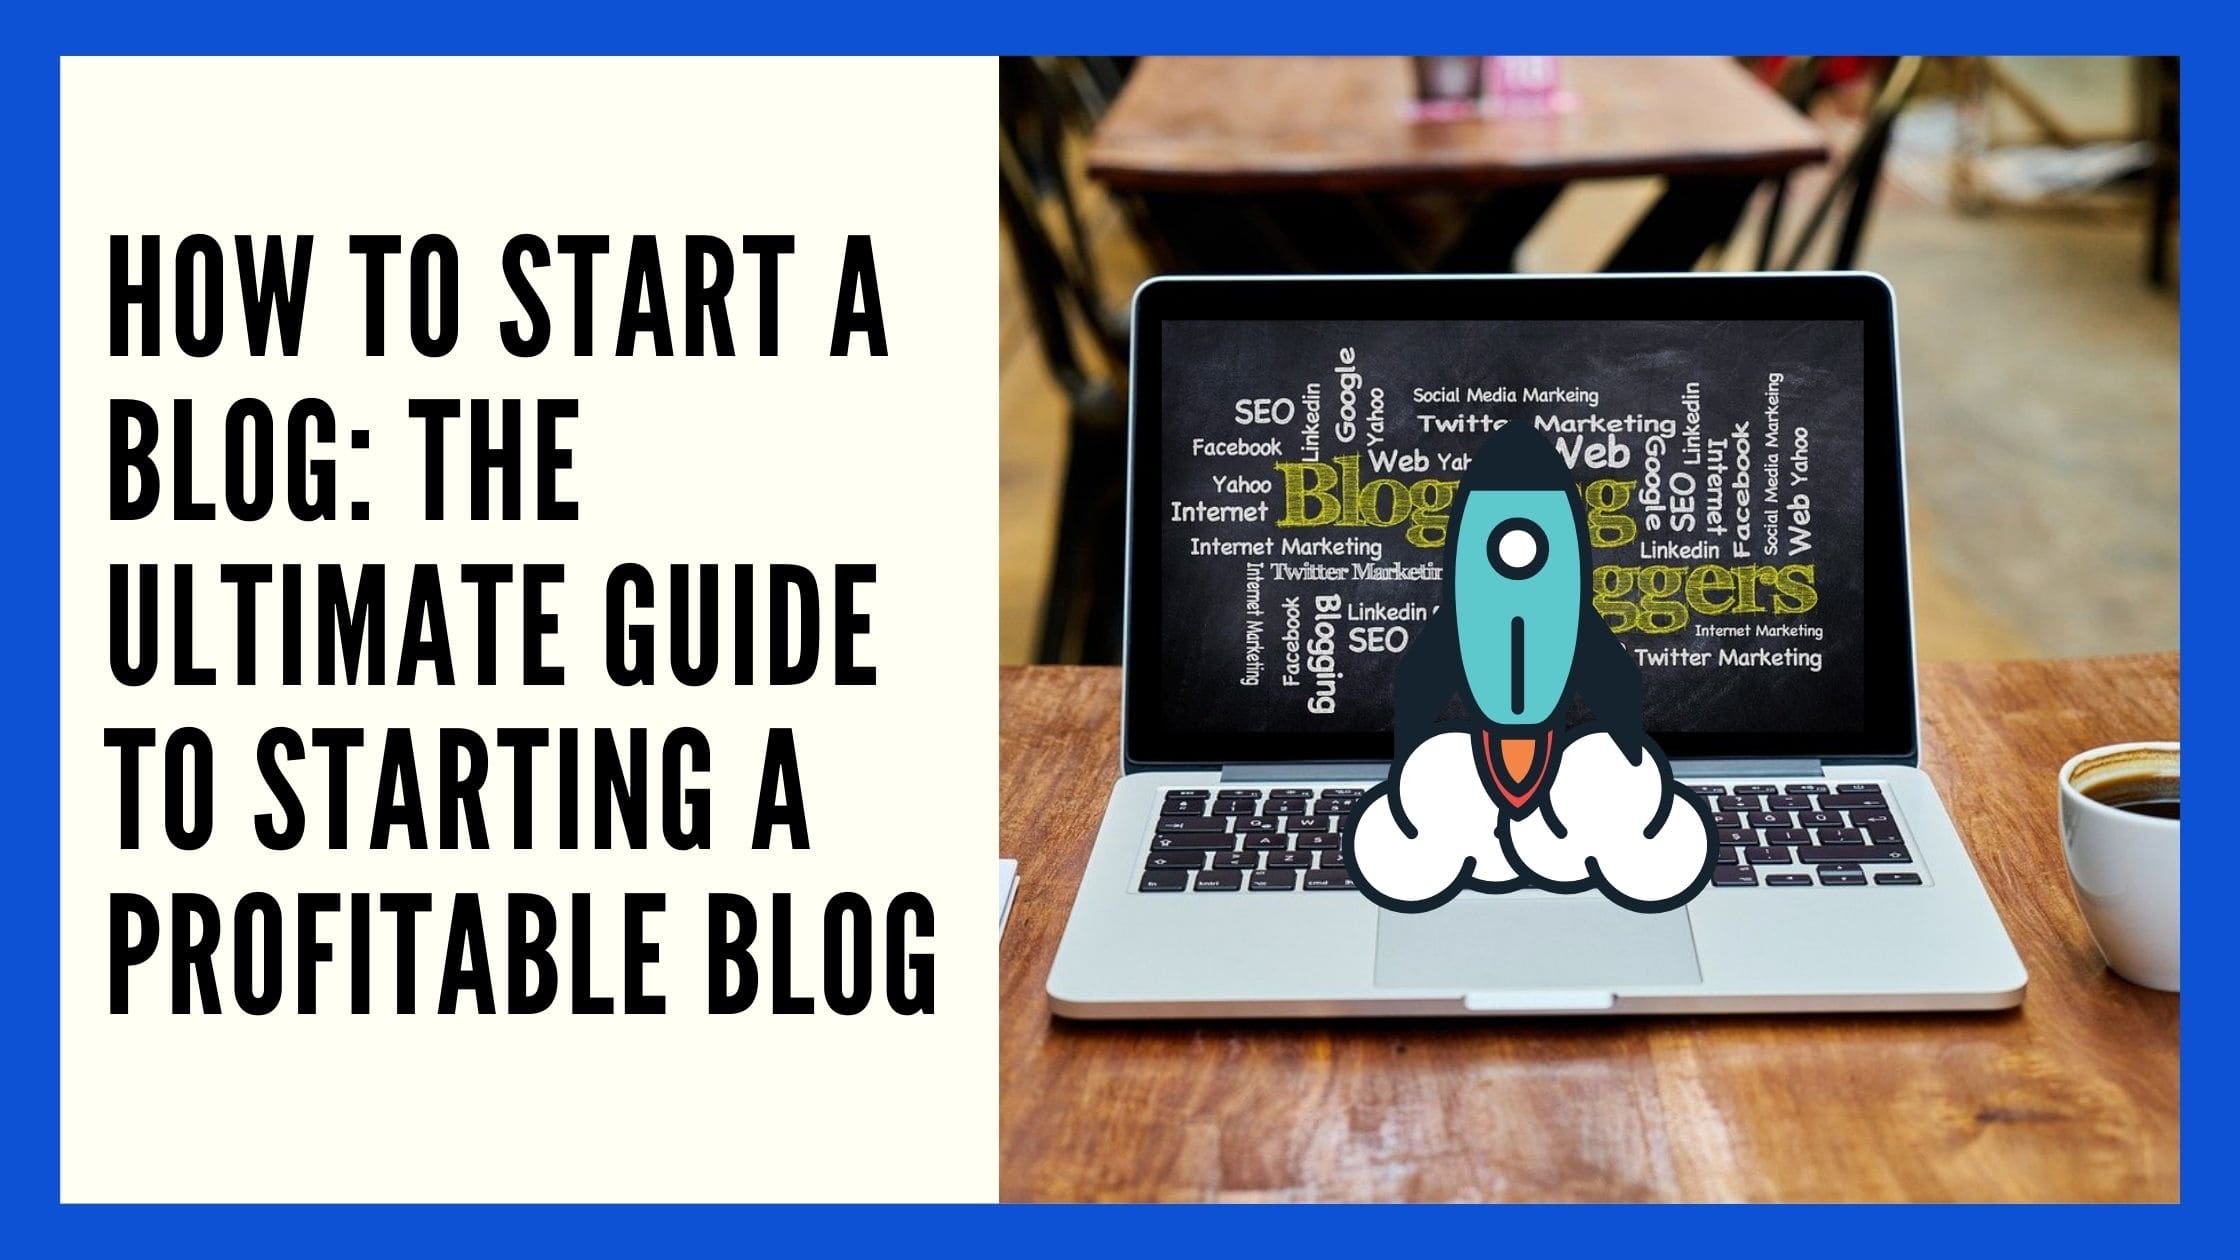 How to start a blog: the ultimate guide to starting a profitable blog